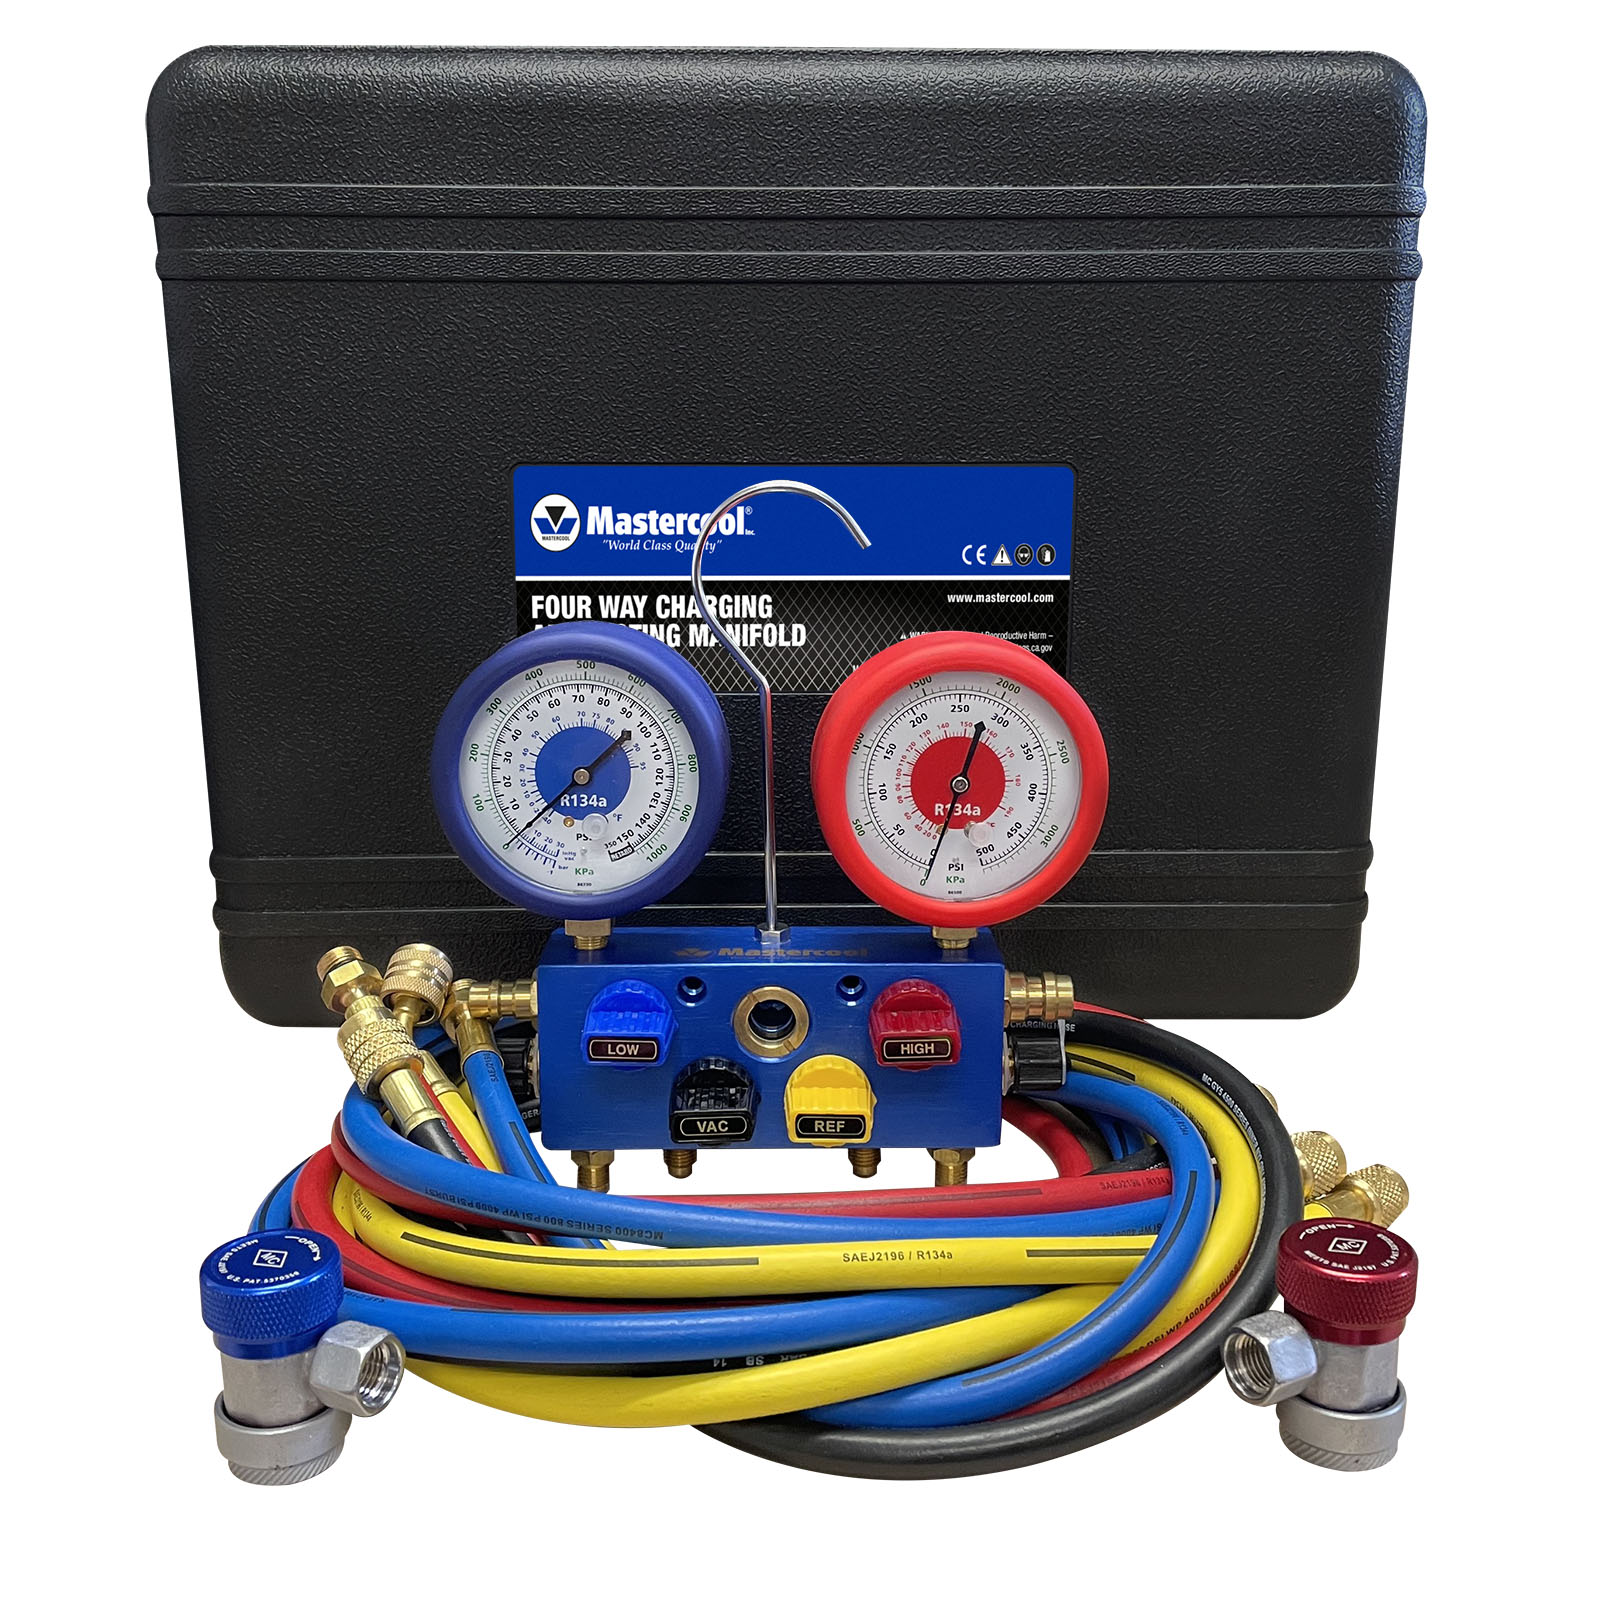 MASTERCOOL A/C Charging Manifold with Gauges and Hoses For R-134a R-22 R-12 